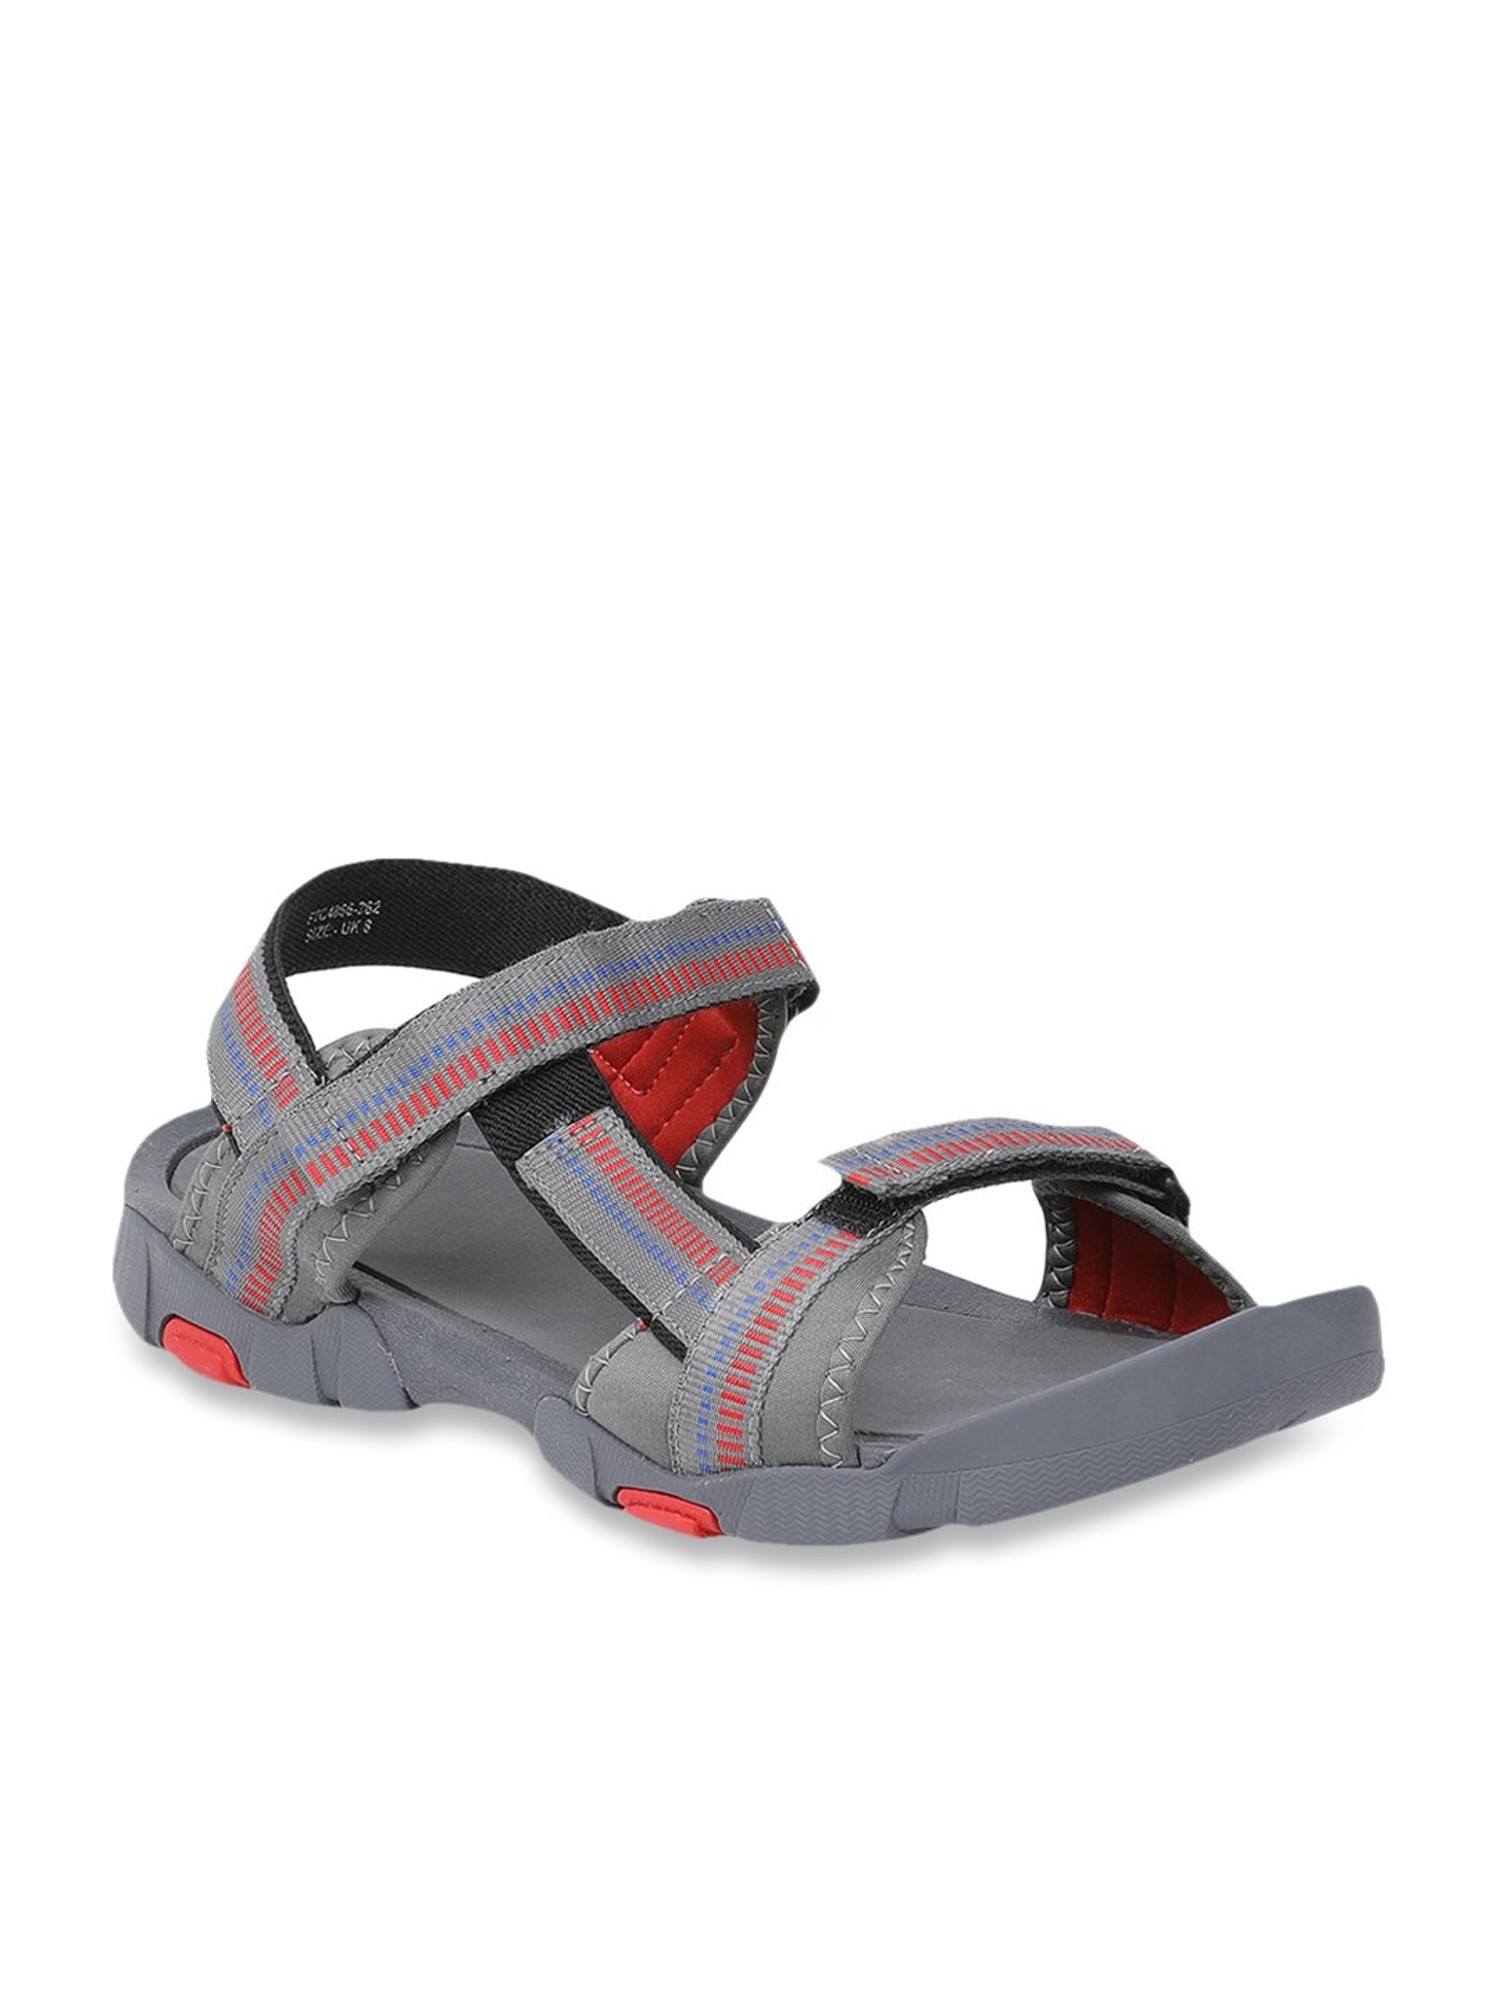 Buy Lotto Retro Navy Floater Sandals for Men at Best Price  Tata CLiQ